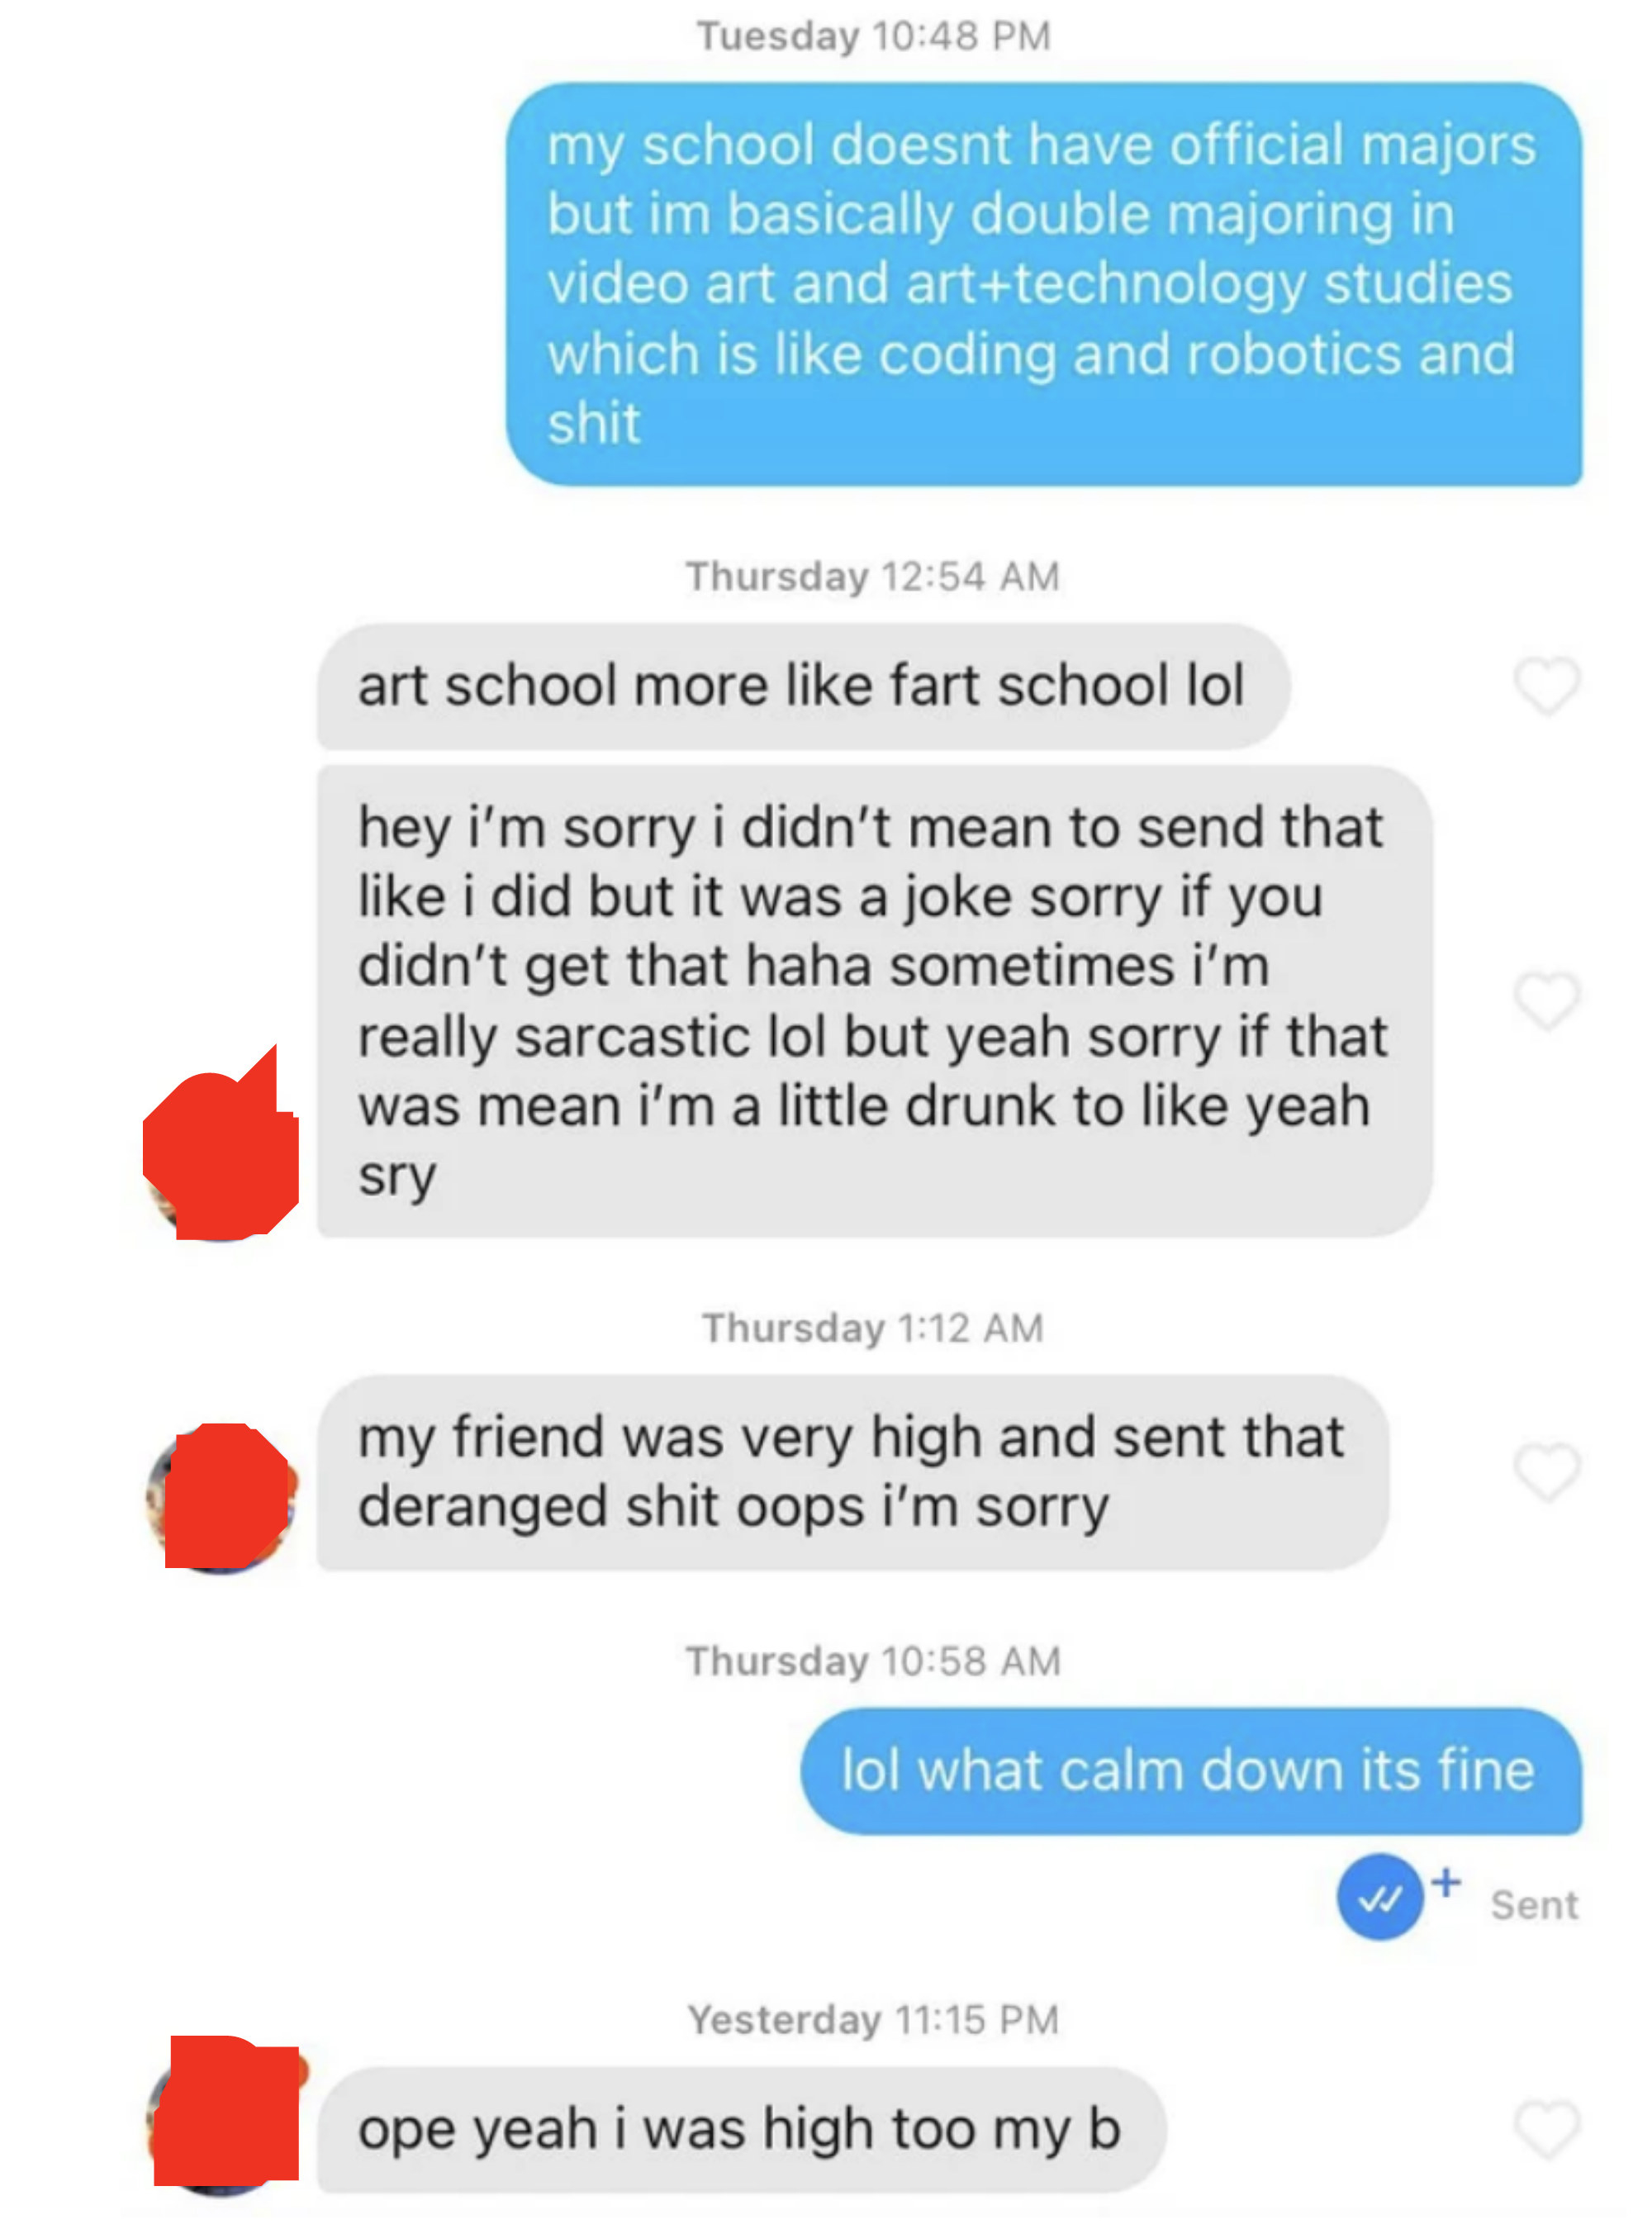 Someone says they&#x27;re in art school, the other person responds &quot;art school, more like fart school&quot; then sends two texts afterward apologizing for the joke and saying they&#x27;re drunk and high